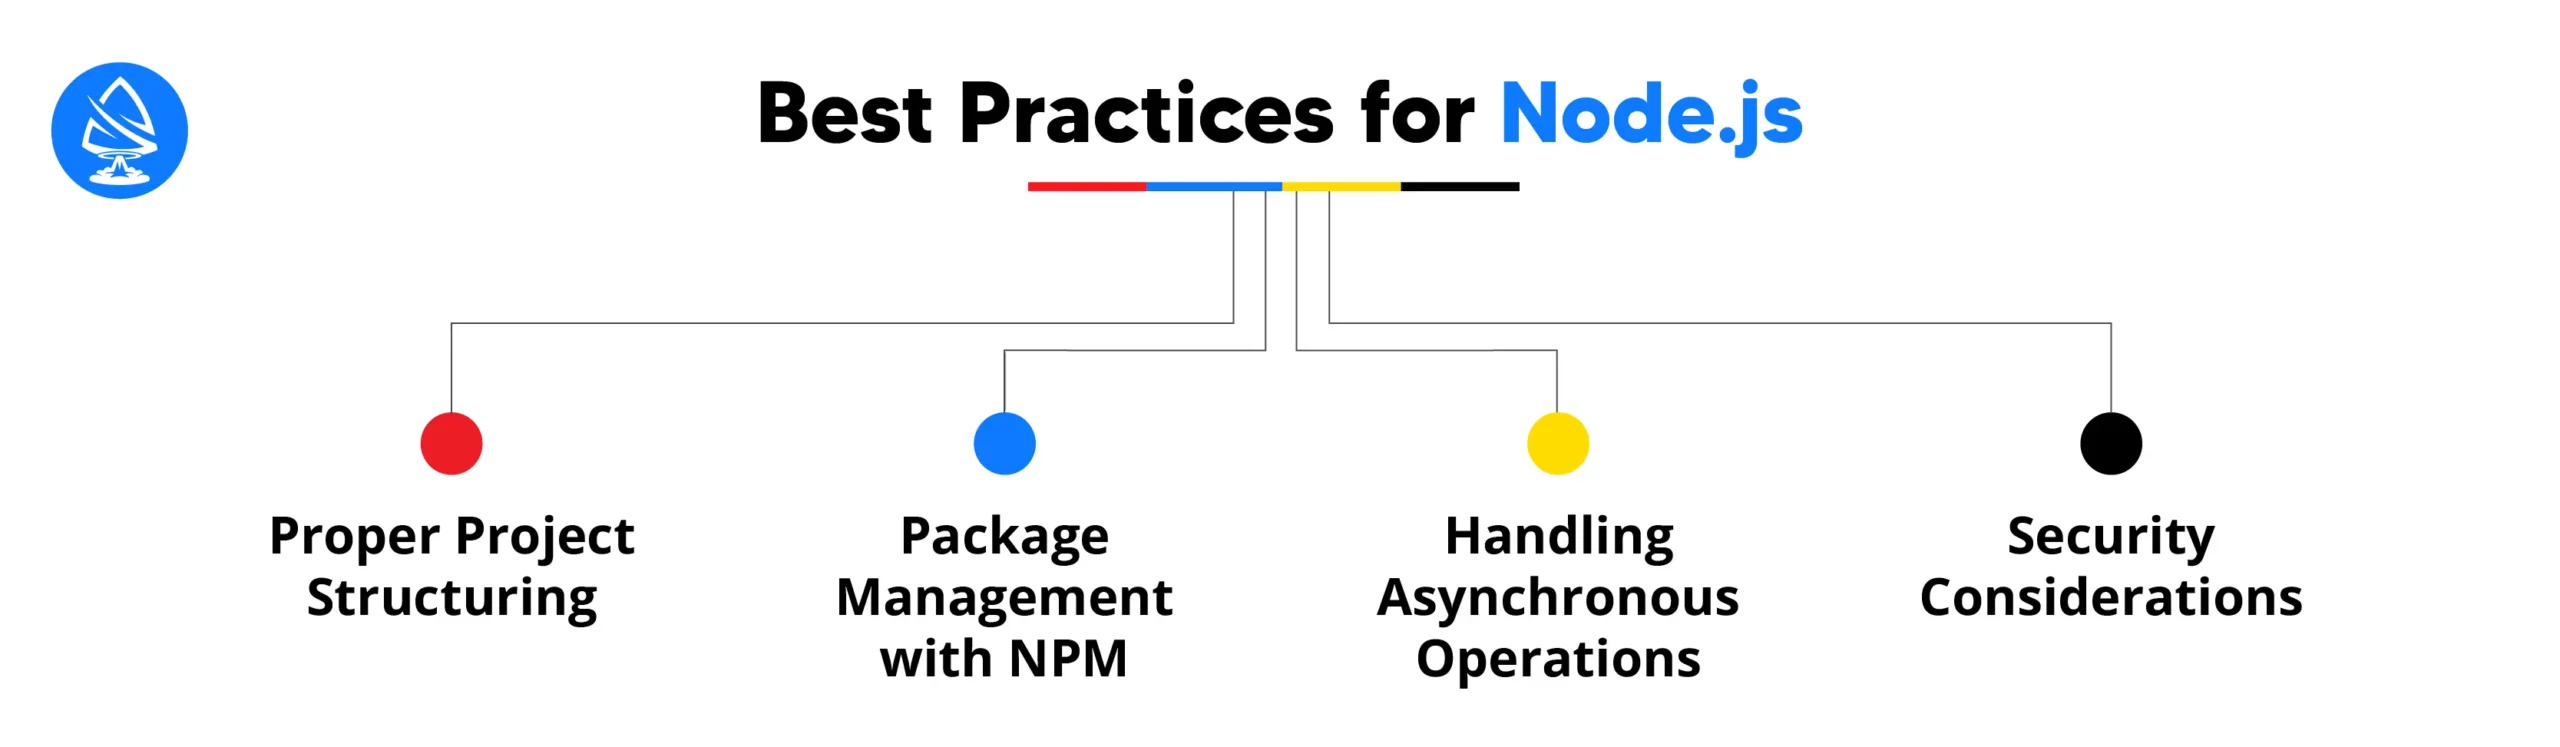 Best Practices for Using Node js in Backend Development